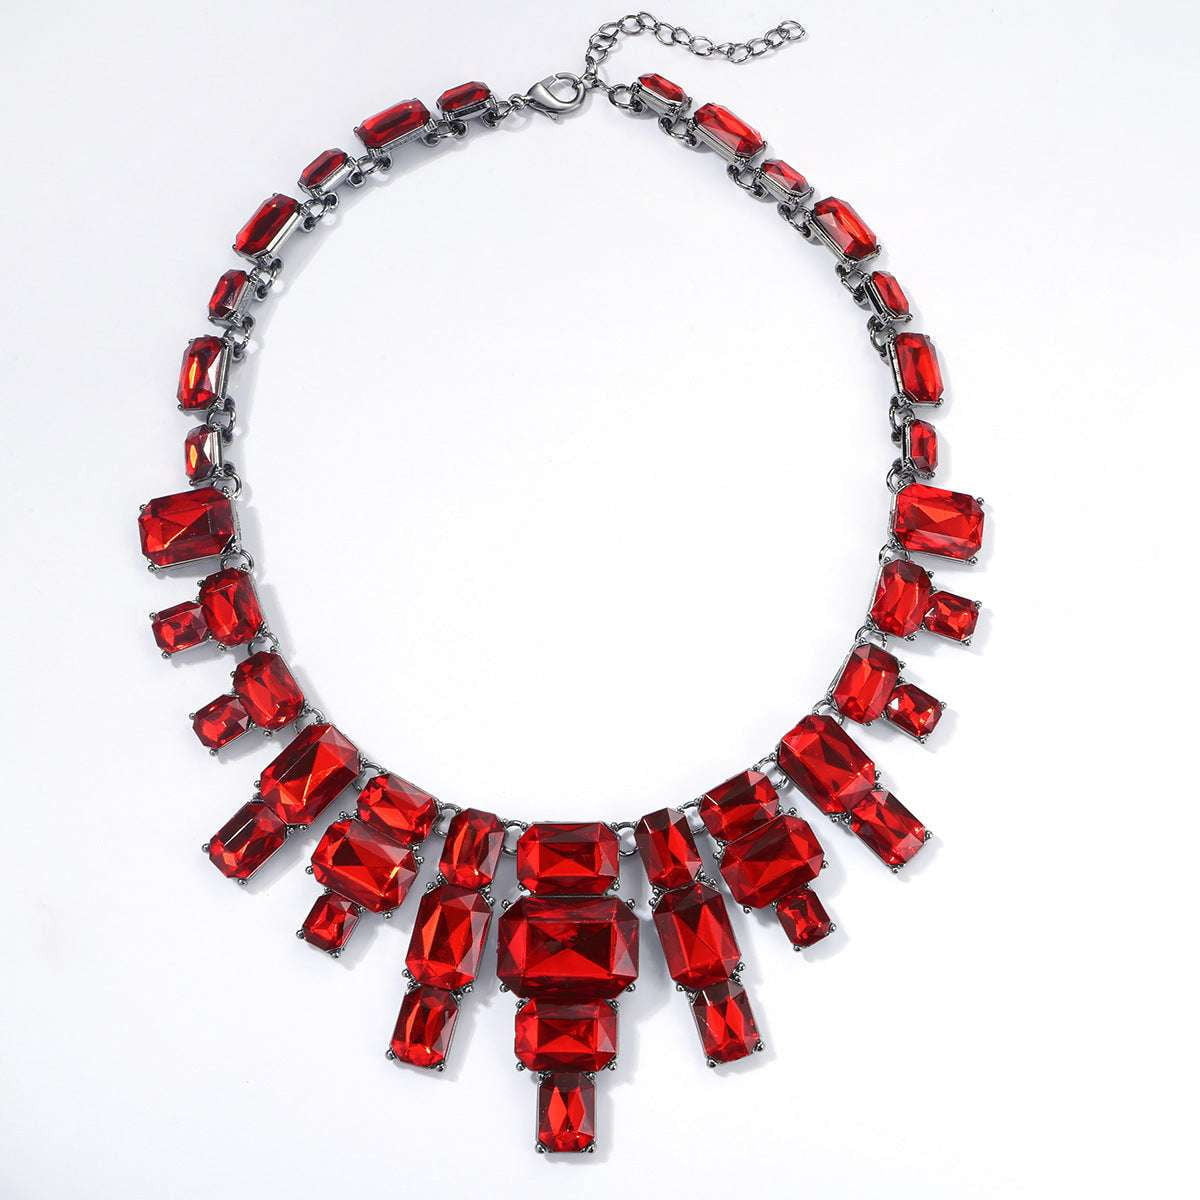 Crystal Statement Necklace, Elegant Crystal Jewelry, High-end Necklace Jewelry - available at Sparq Mart